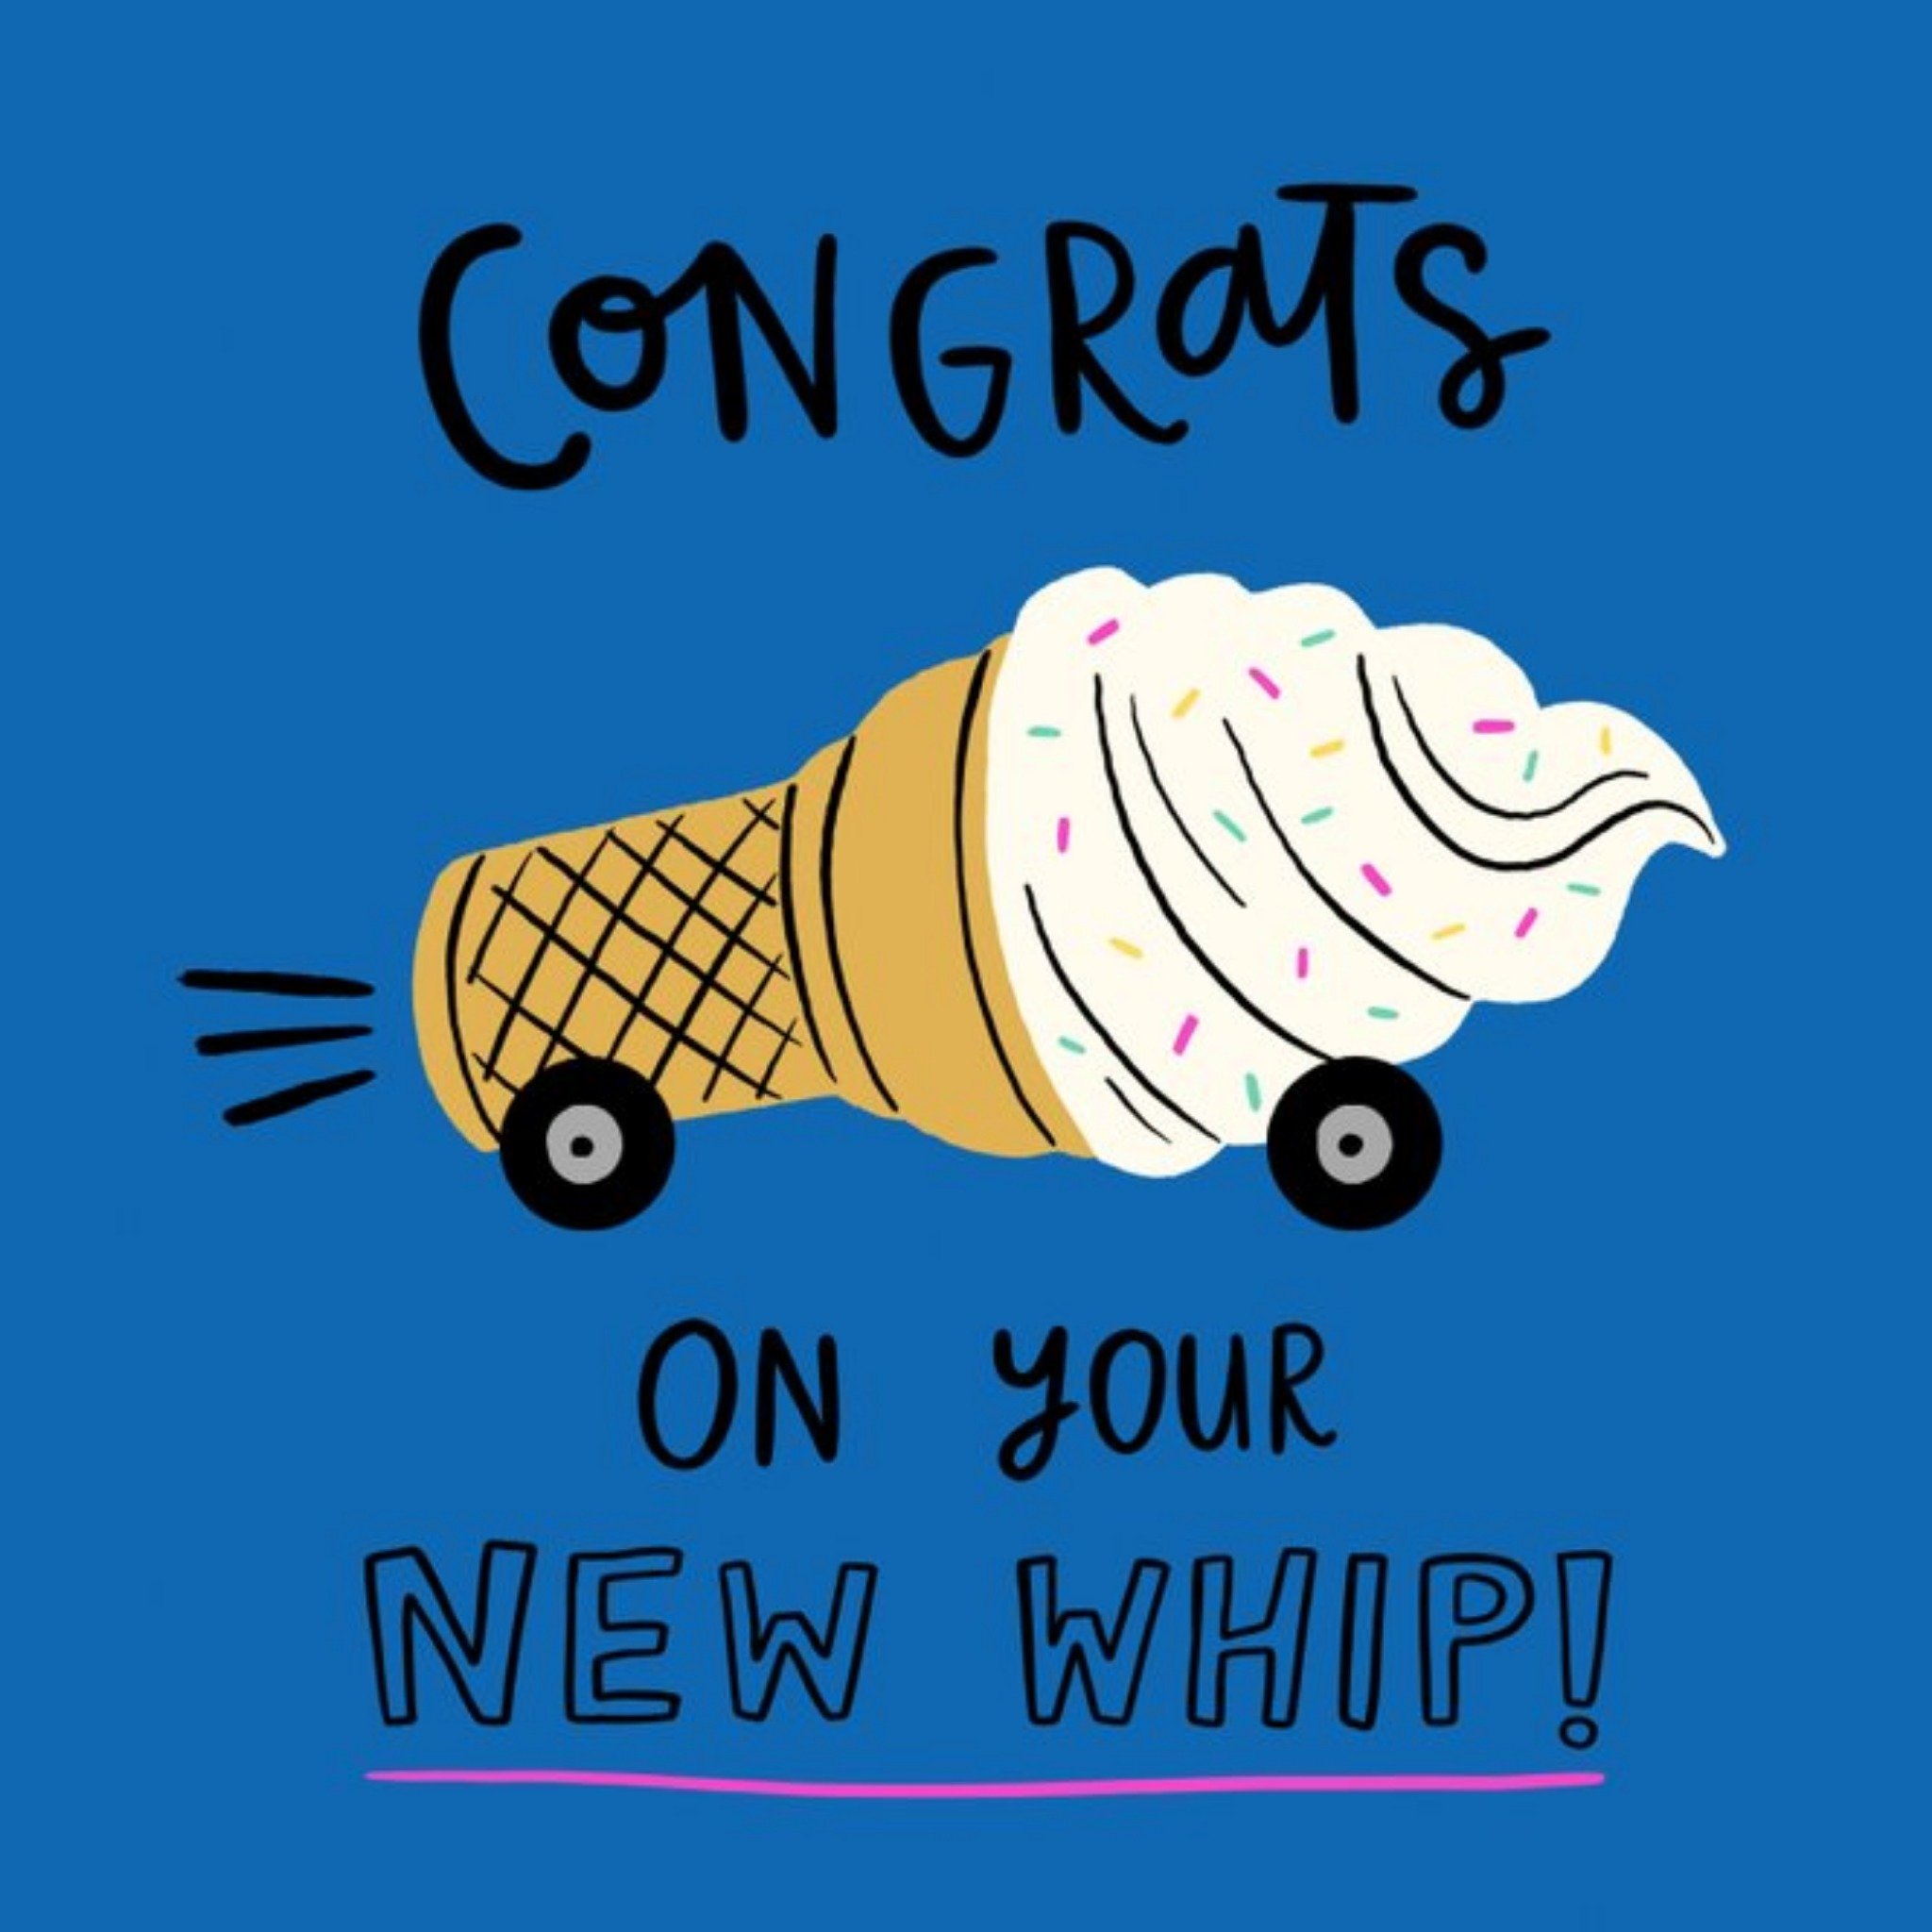 Moonpig Kapow Illustrated Ice Cream Cone On Wheels Congrats On Your New Whip Card, Square